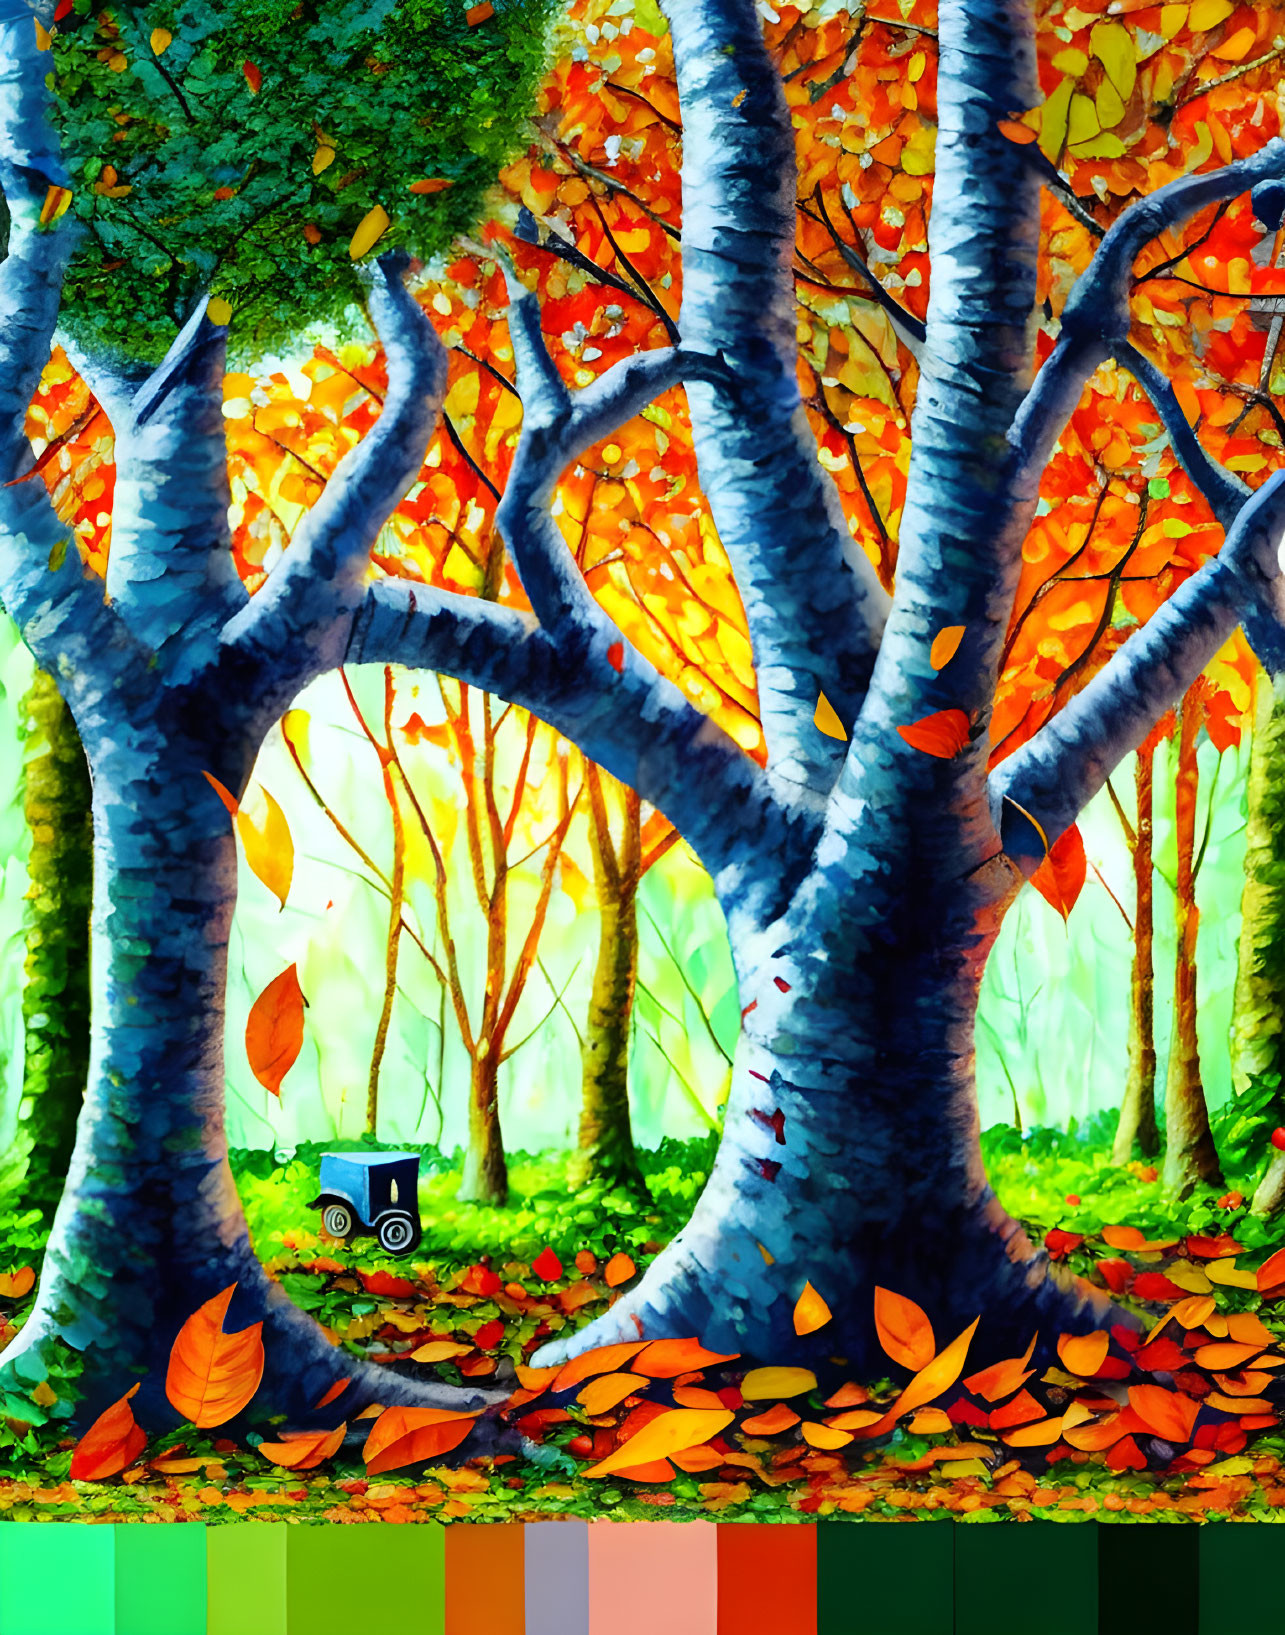 Colorful digital artwork: whimsical forest with blue trees, orange leaves, small train.